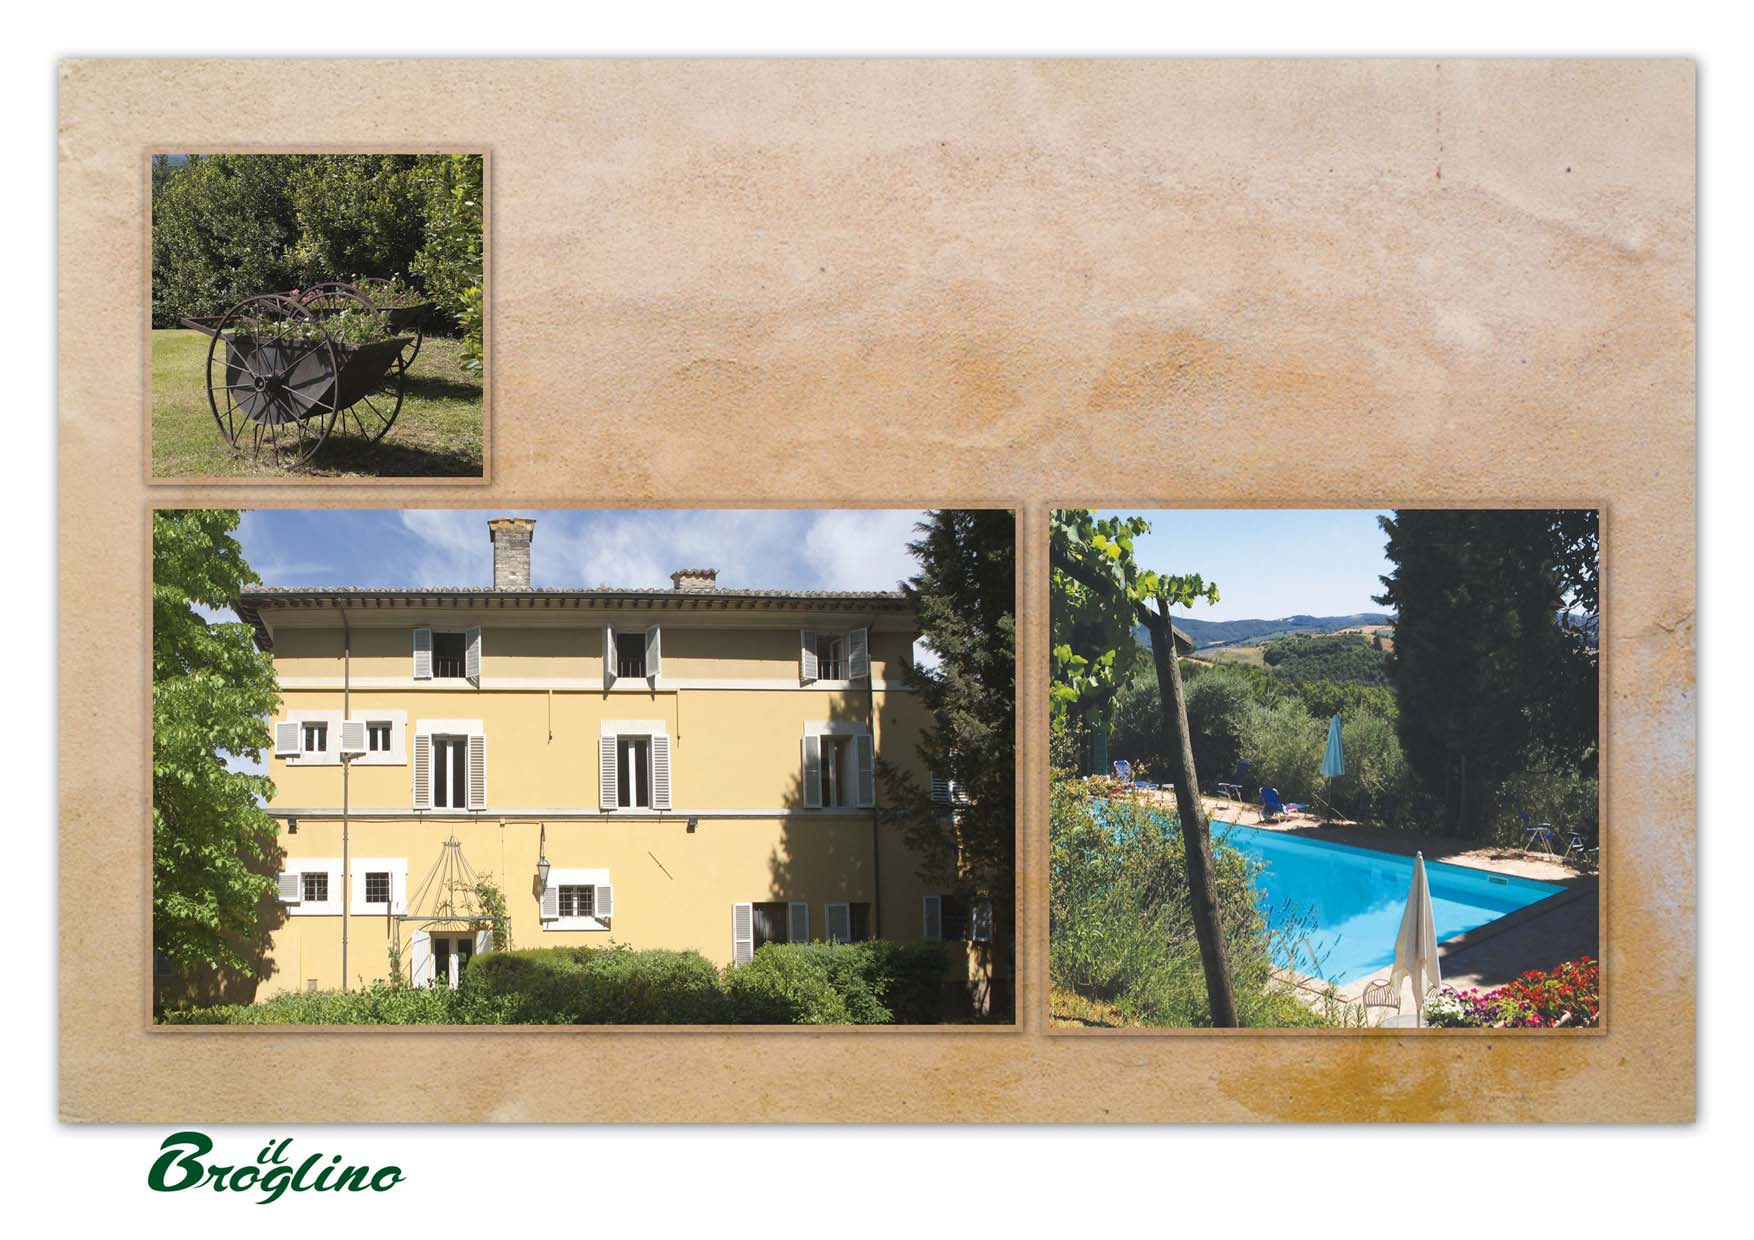 Il Broglino is a family mansion that, during the years, has been periodically restructured and revamped by the owners.